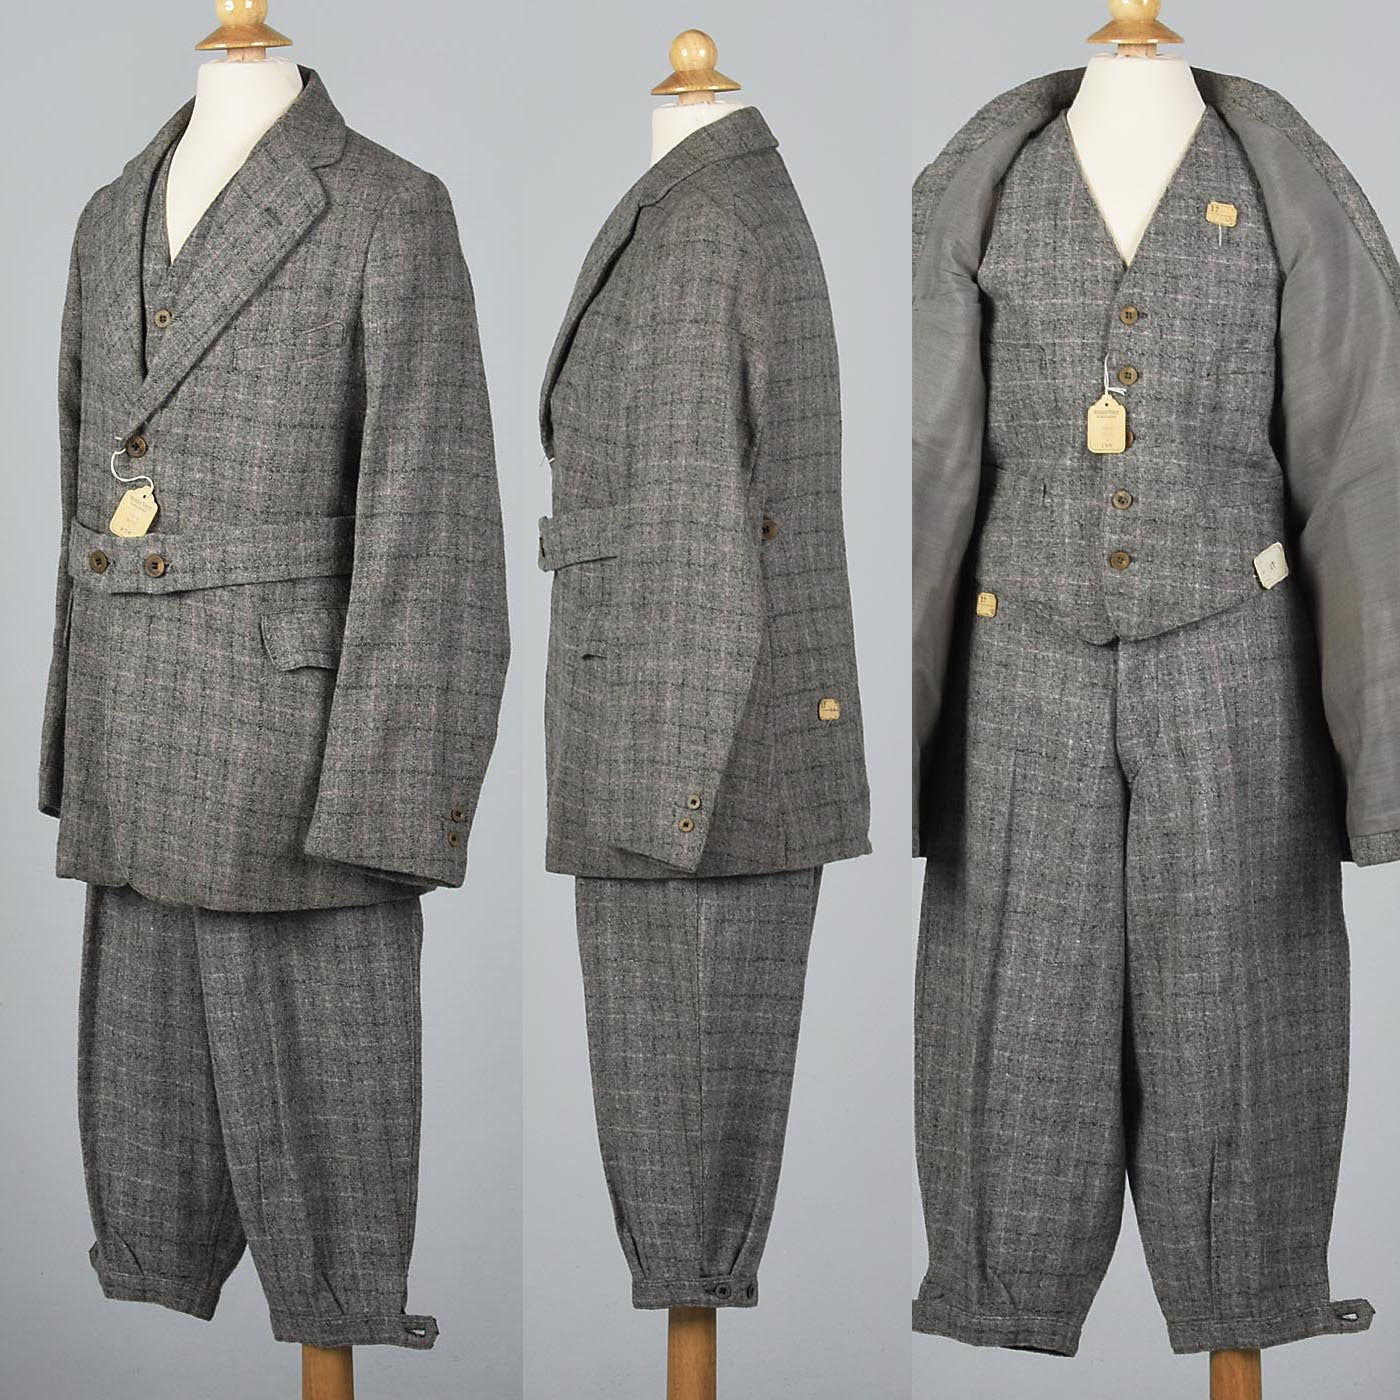 Deadstock 1920s Men's Three Piece  Tweed Suit with Plus Fours in Gray and Purple Plaid